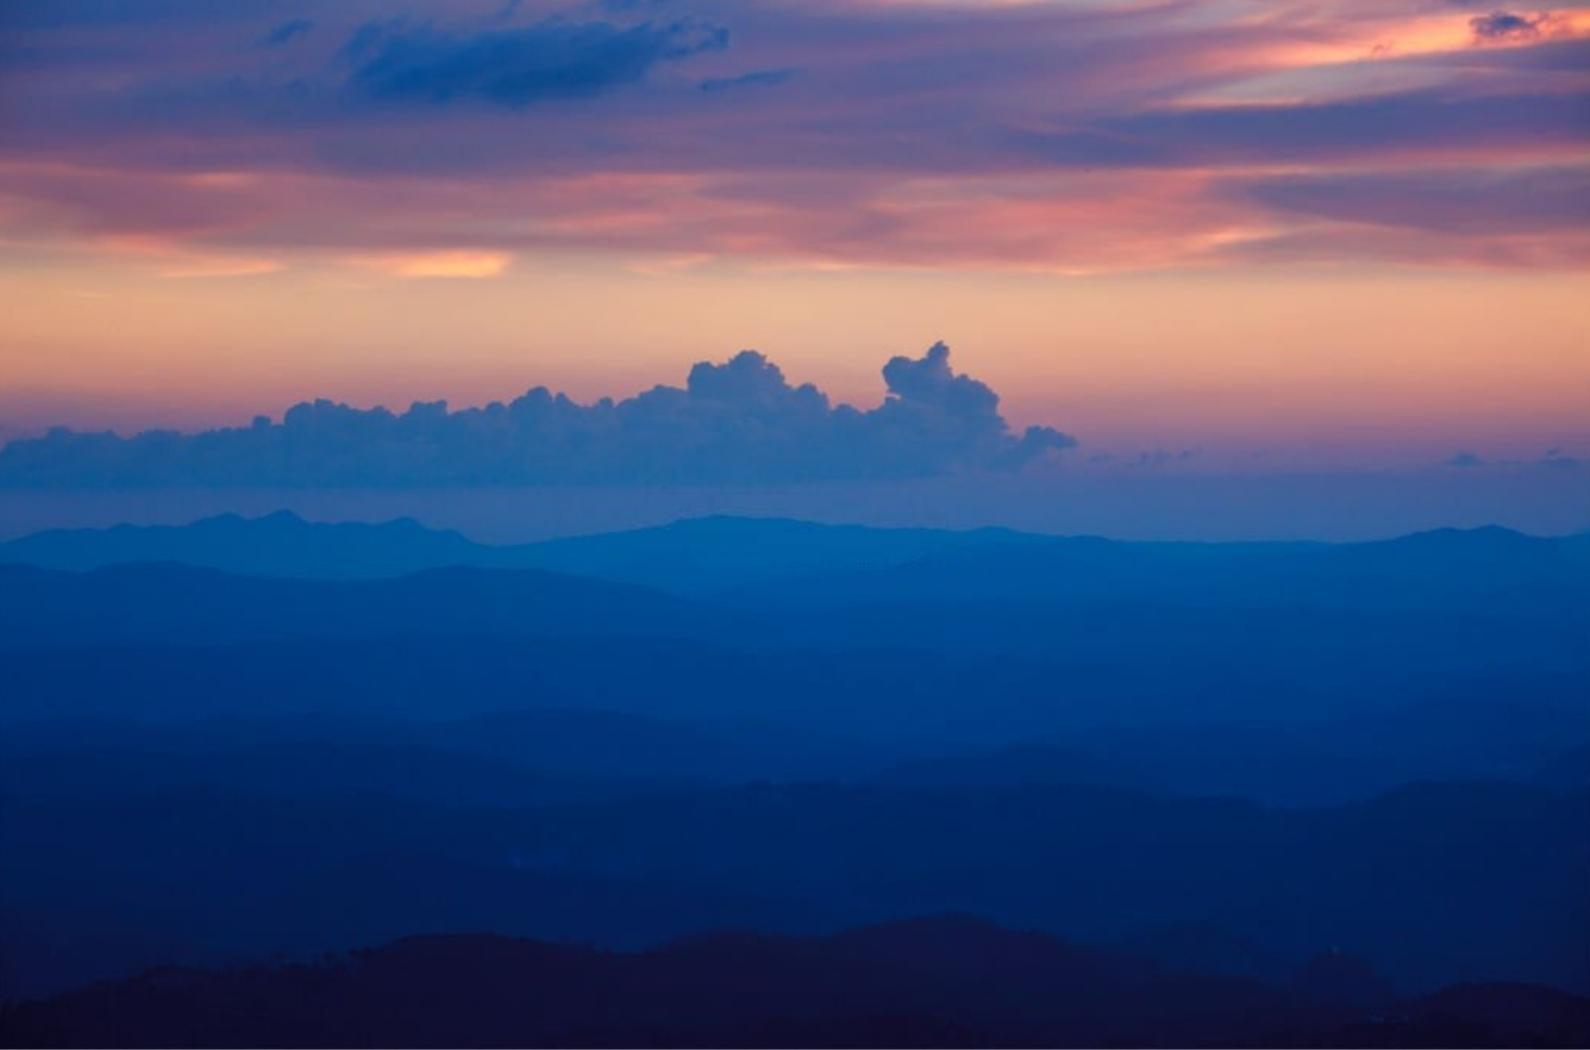 Silhouettes of hills in valley on sunset. Pothamedu viewpoint, Munnar.